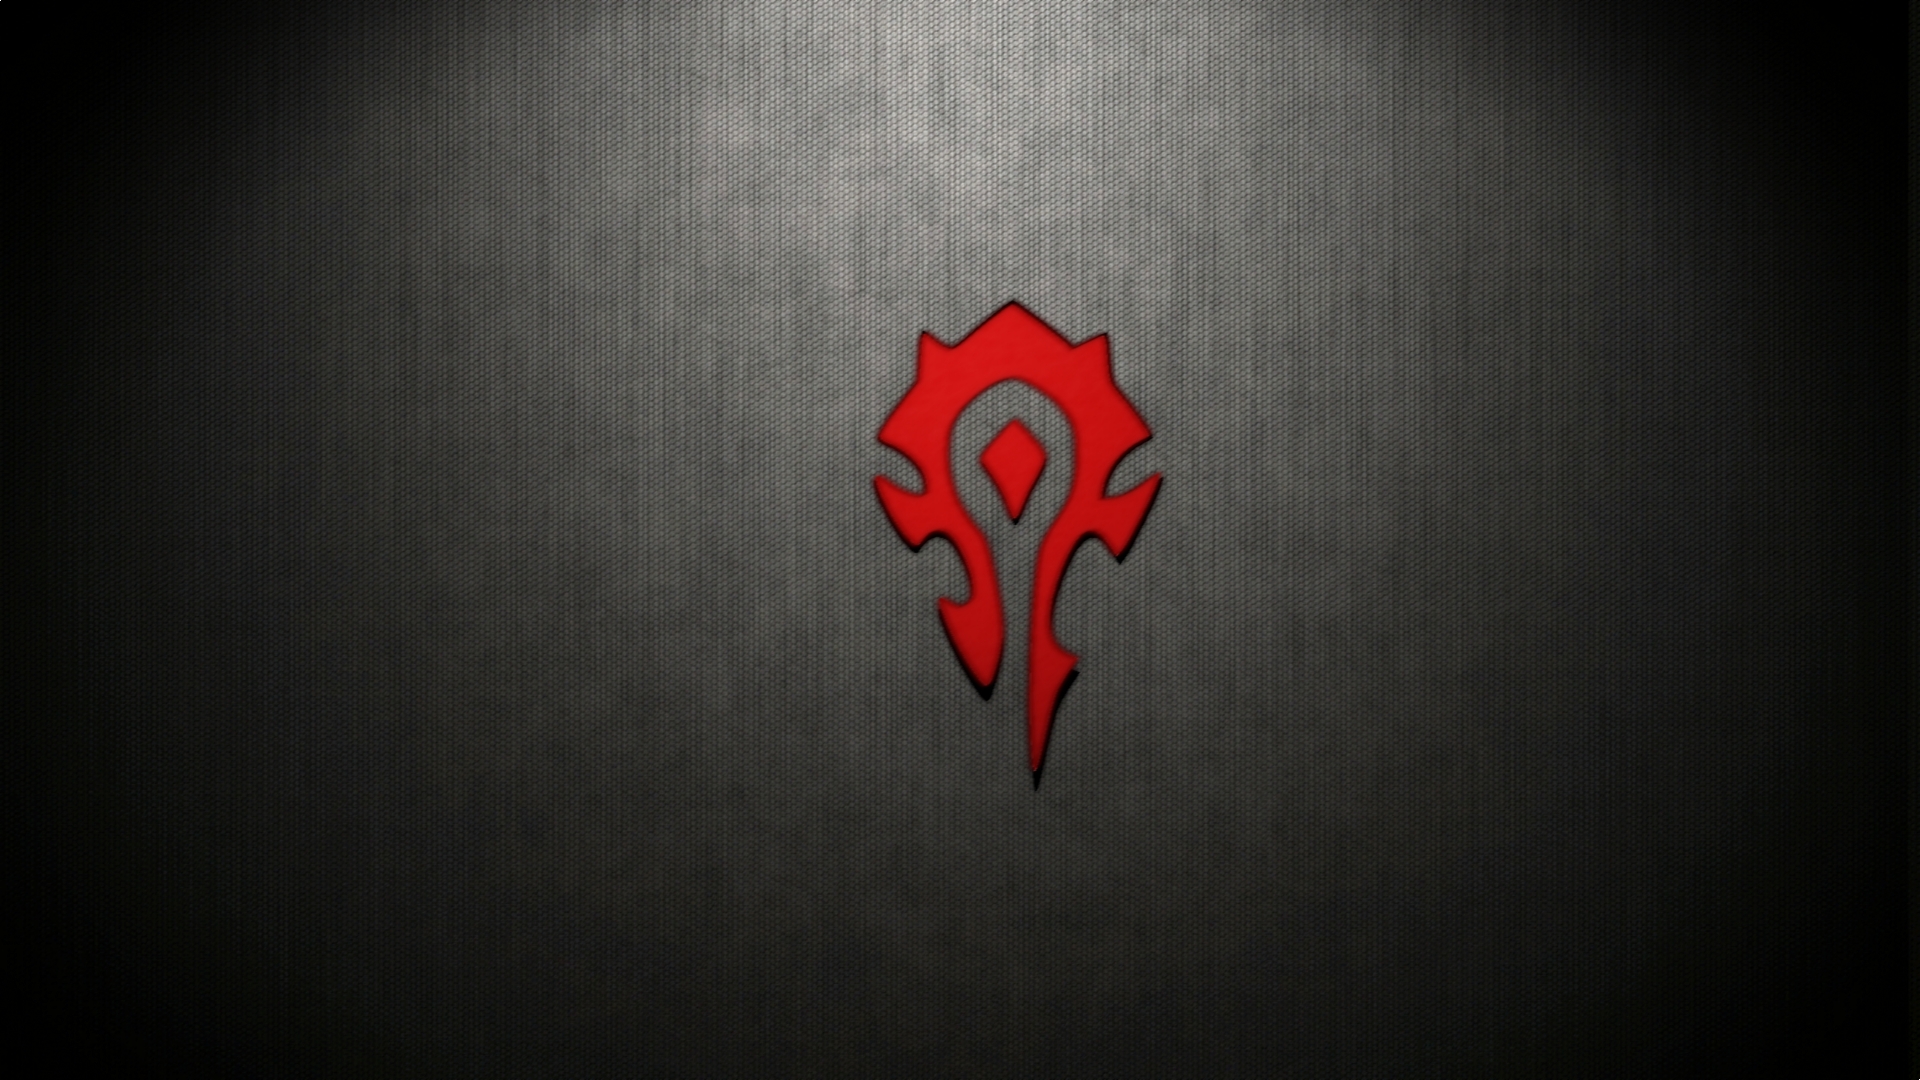 Wow Horde Logo Wallpaper Images amp Pictures   Becuo 1920x1080